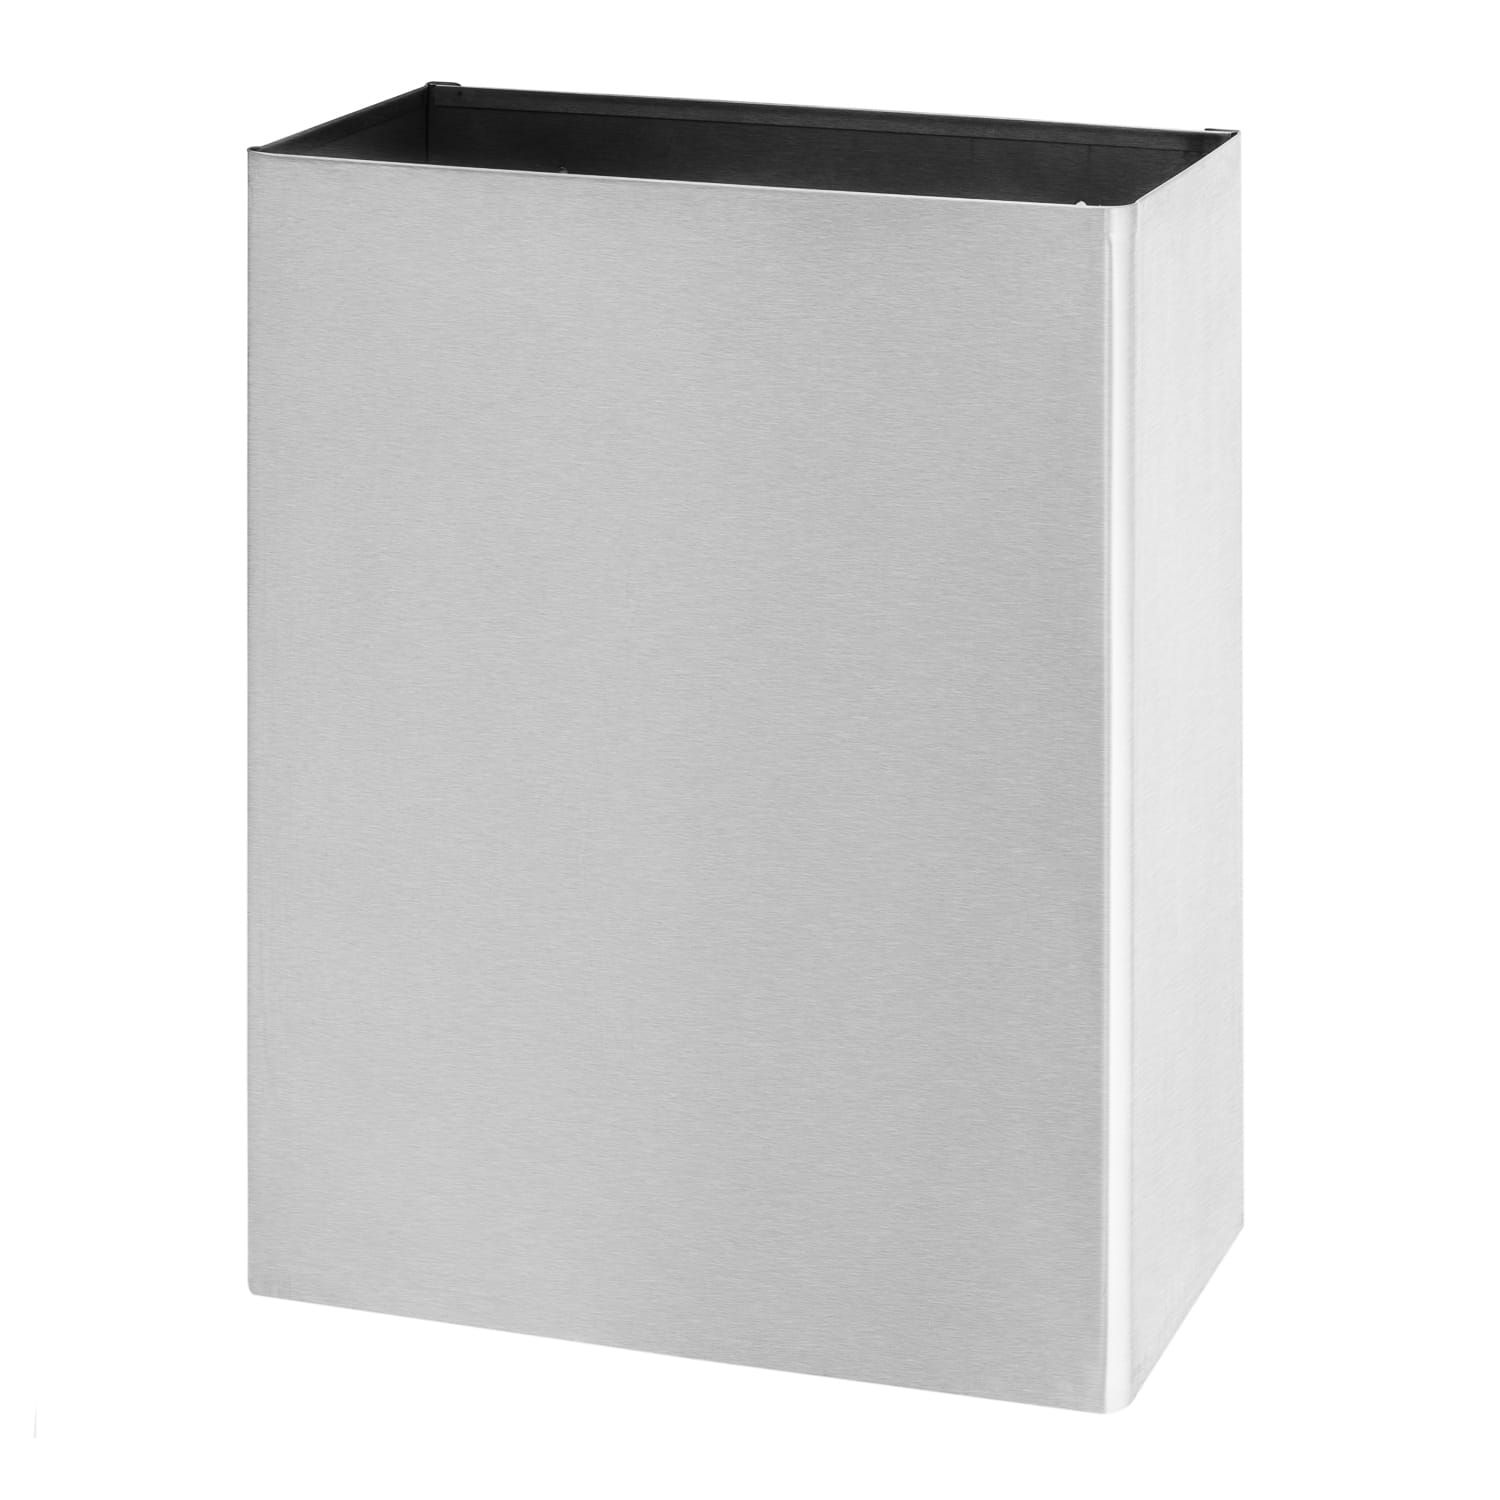 Waste bin wall-mounted, Impeco - stainless steel